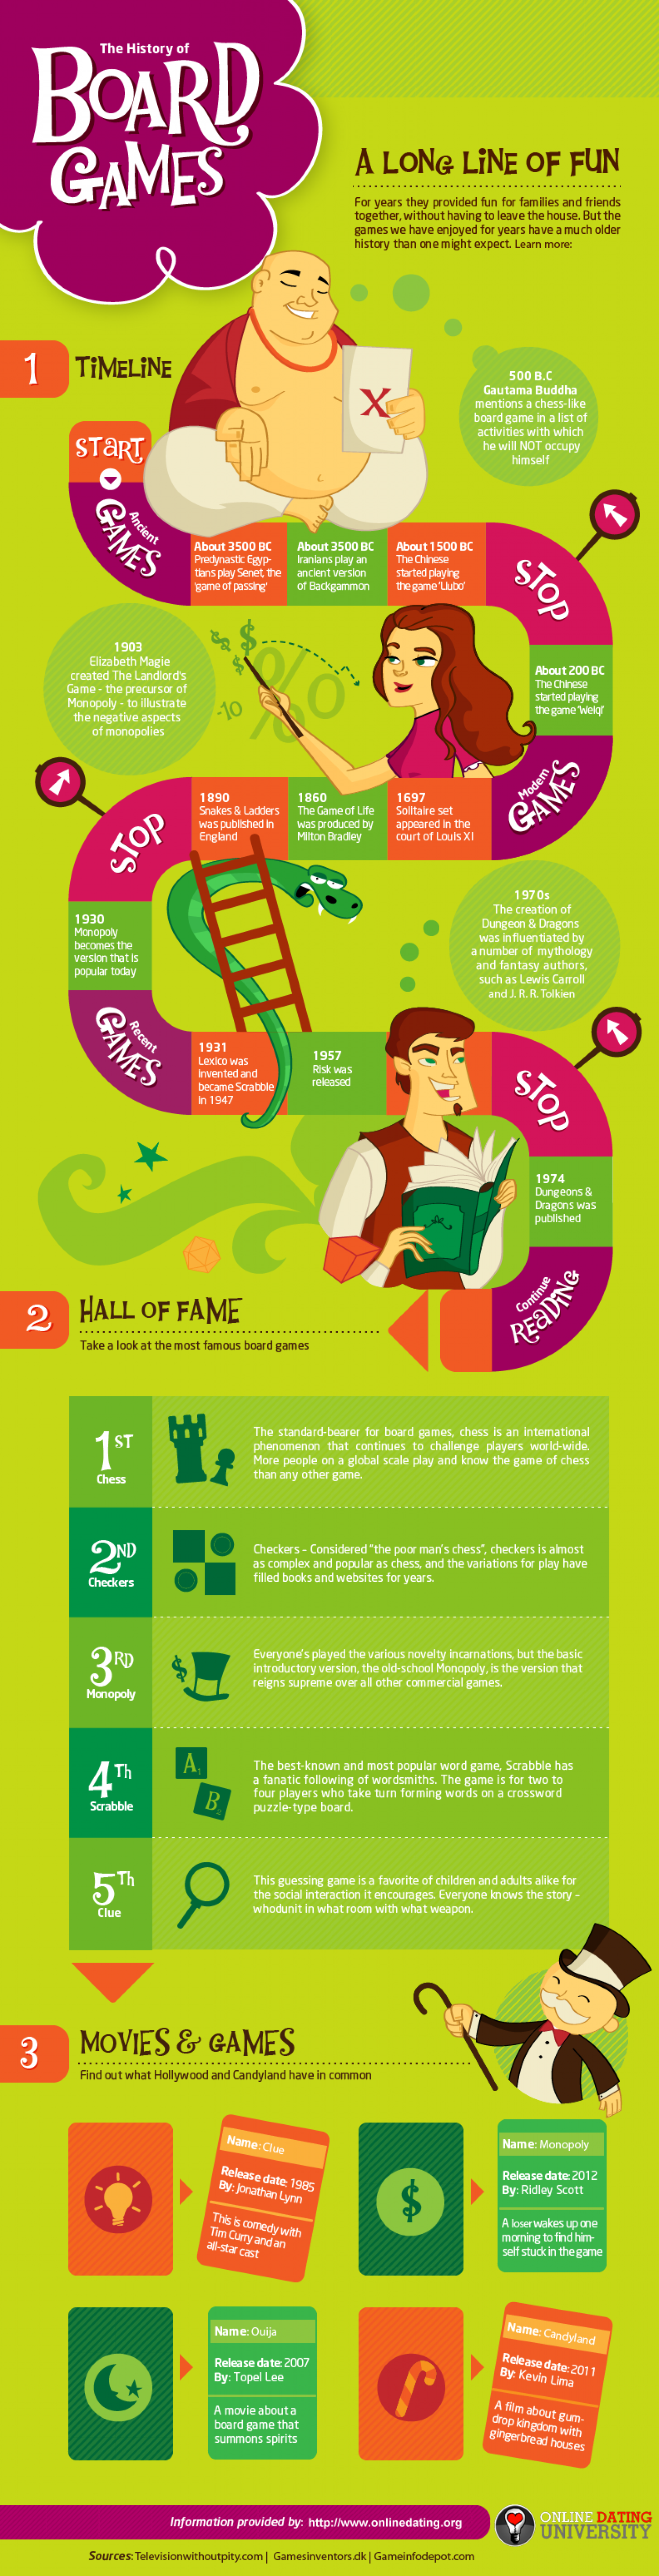 The History of Board Games Infographic